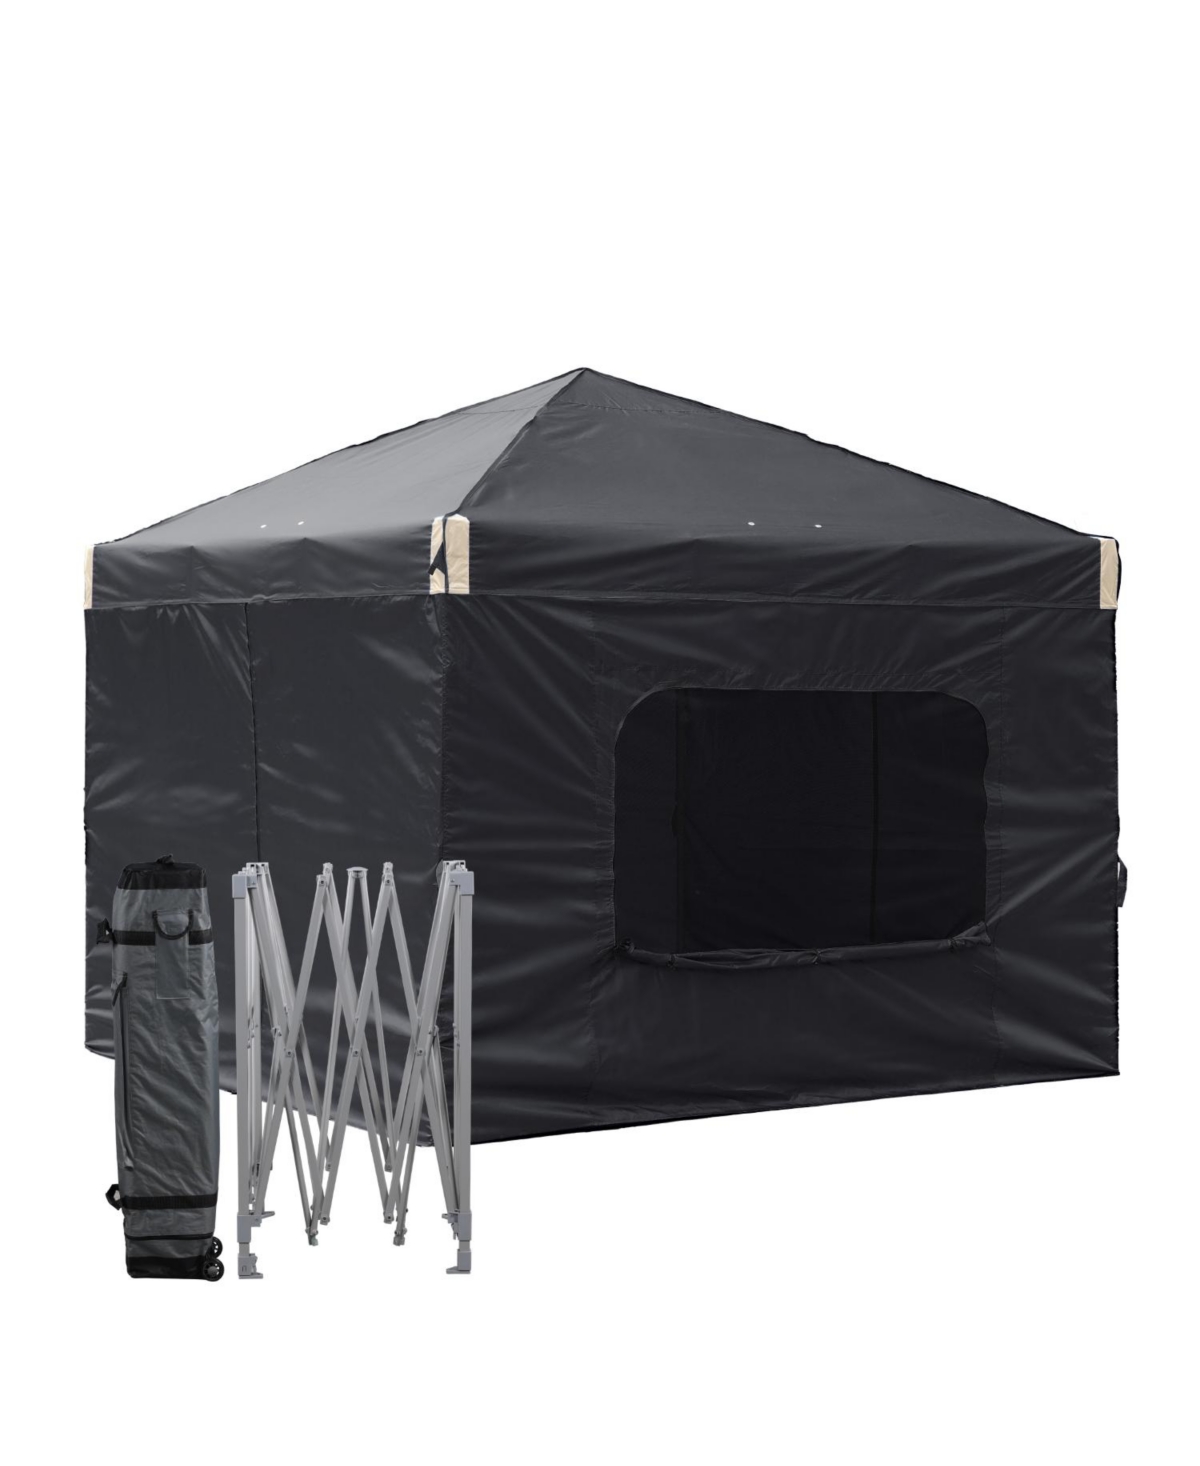 Pop Up Canopy Tent with Removable Mesh Window Sidewalls, Portable Instant Shade Canopy with Roller Bag - Brown